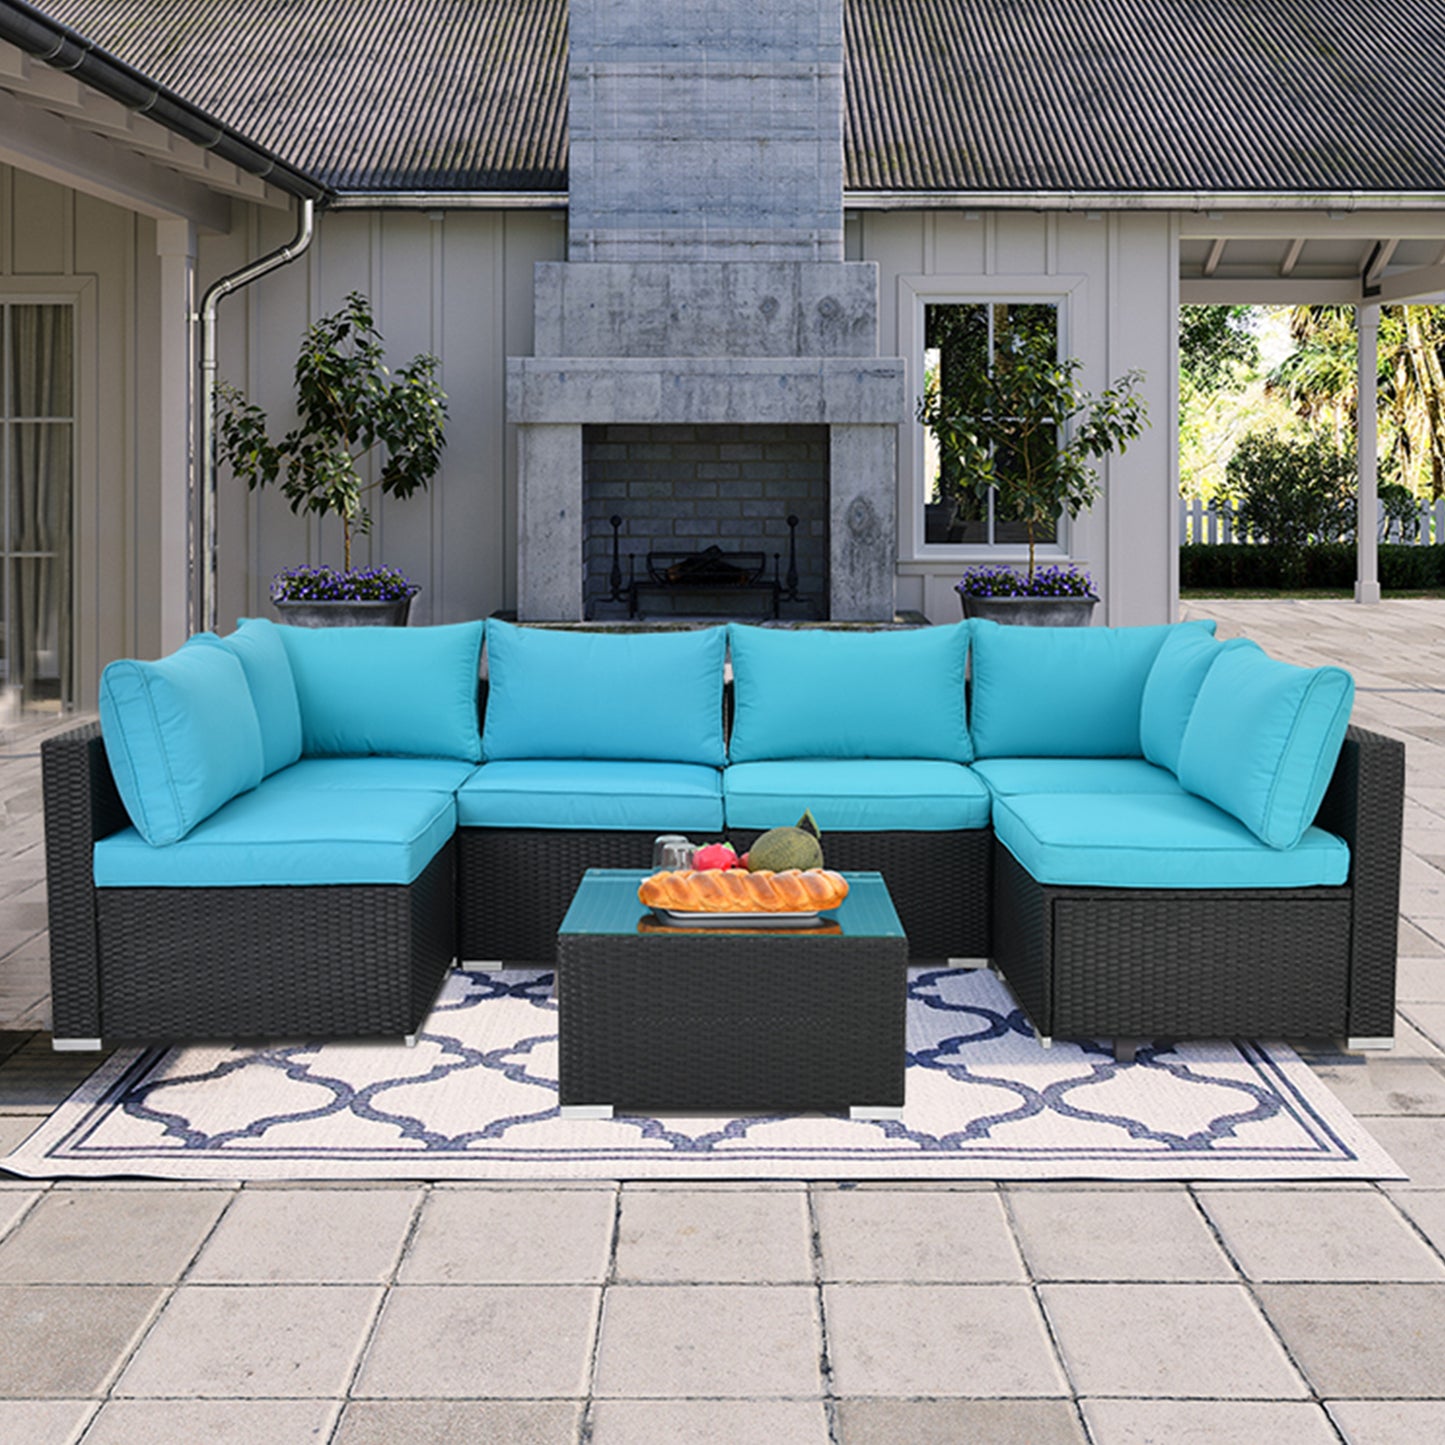 7 Pieces Patio Furniture Sets,Luxury Outdoor All Weather PE Rattan Wicker Lawn Conversation Sets,Garden Sofa Set w/Coffee Table and Couch Cushions for Backyard, Pool (Blue-7PCS)